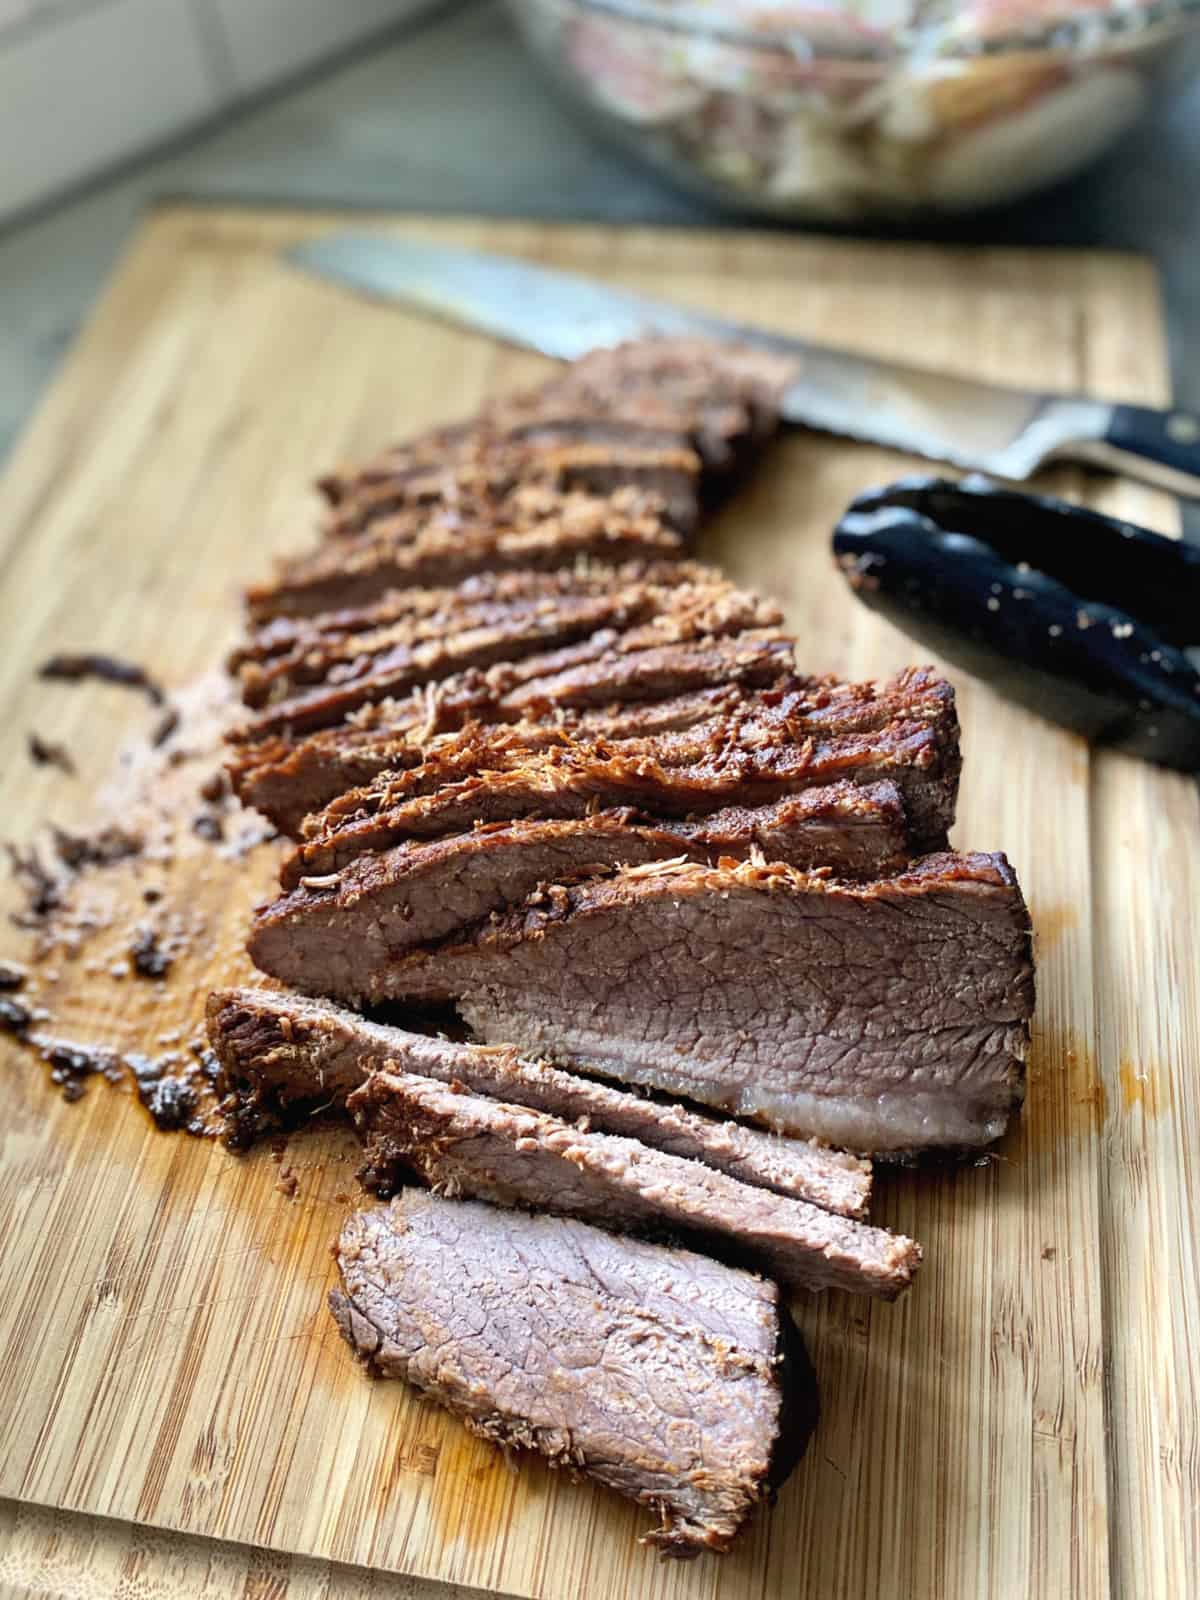 Sliced beef on a wood cutting board with a knife and tongs in the background.